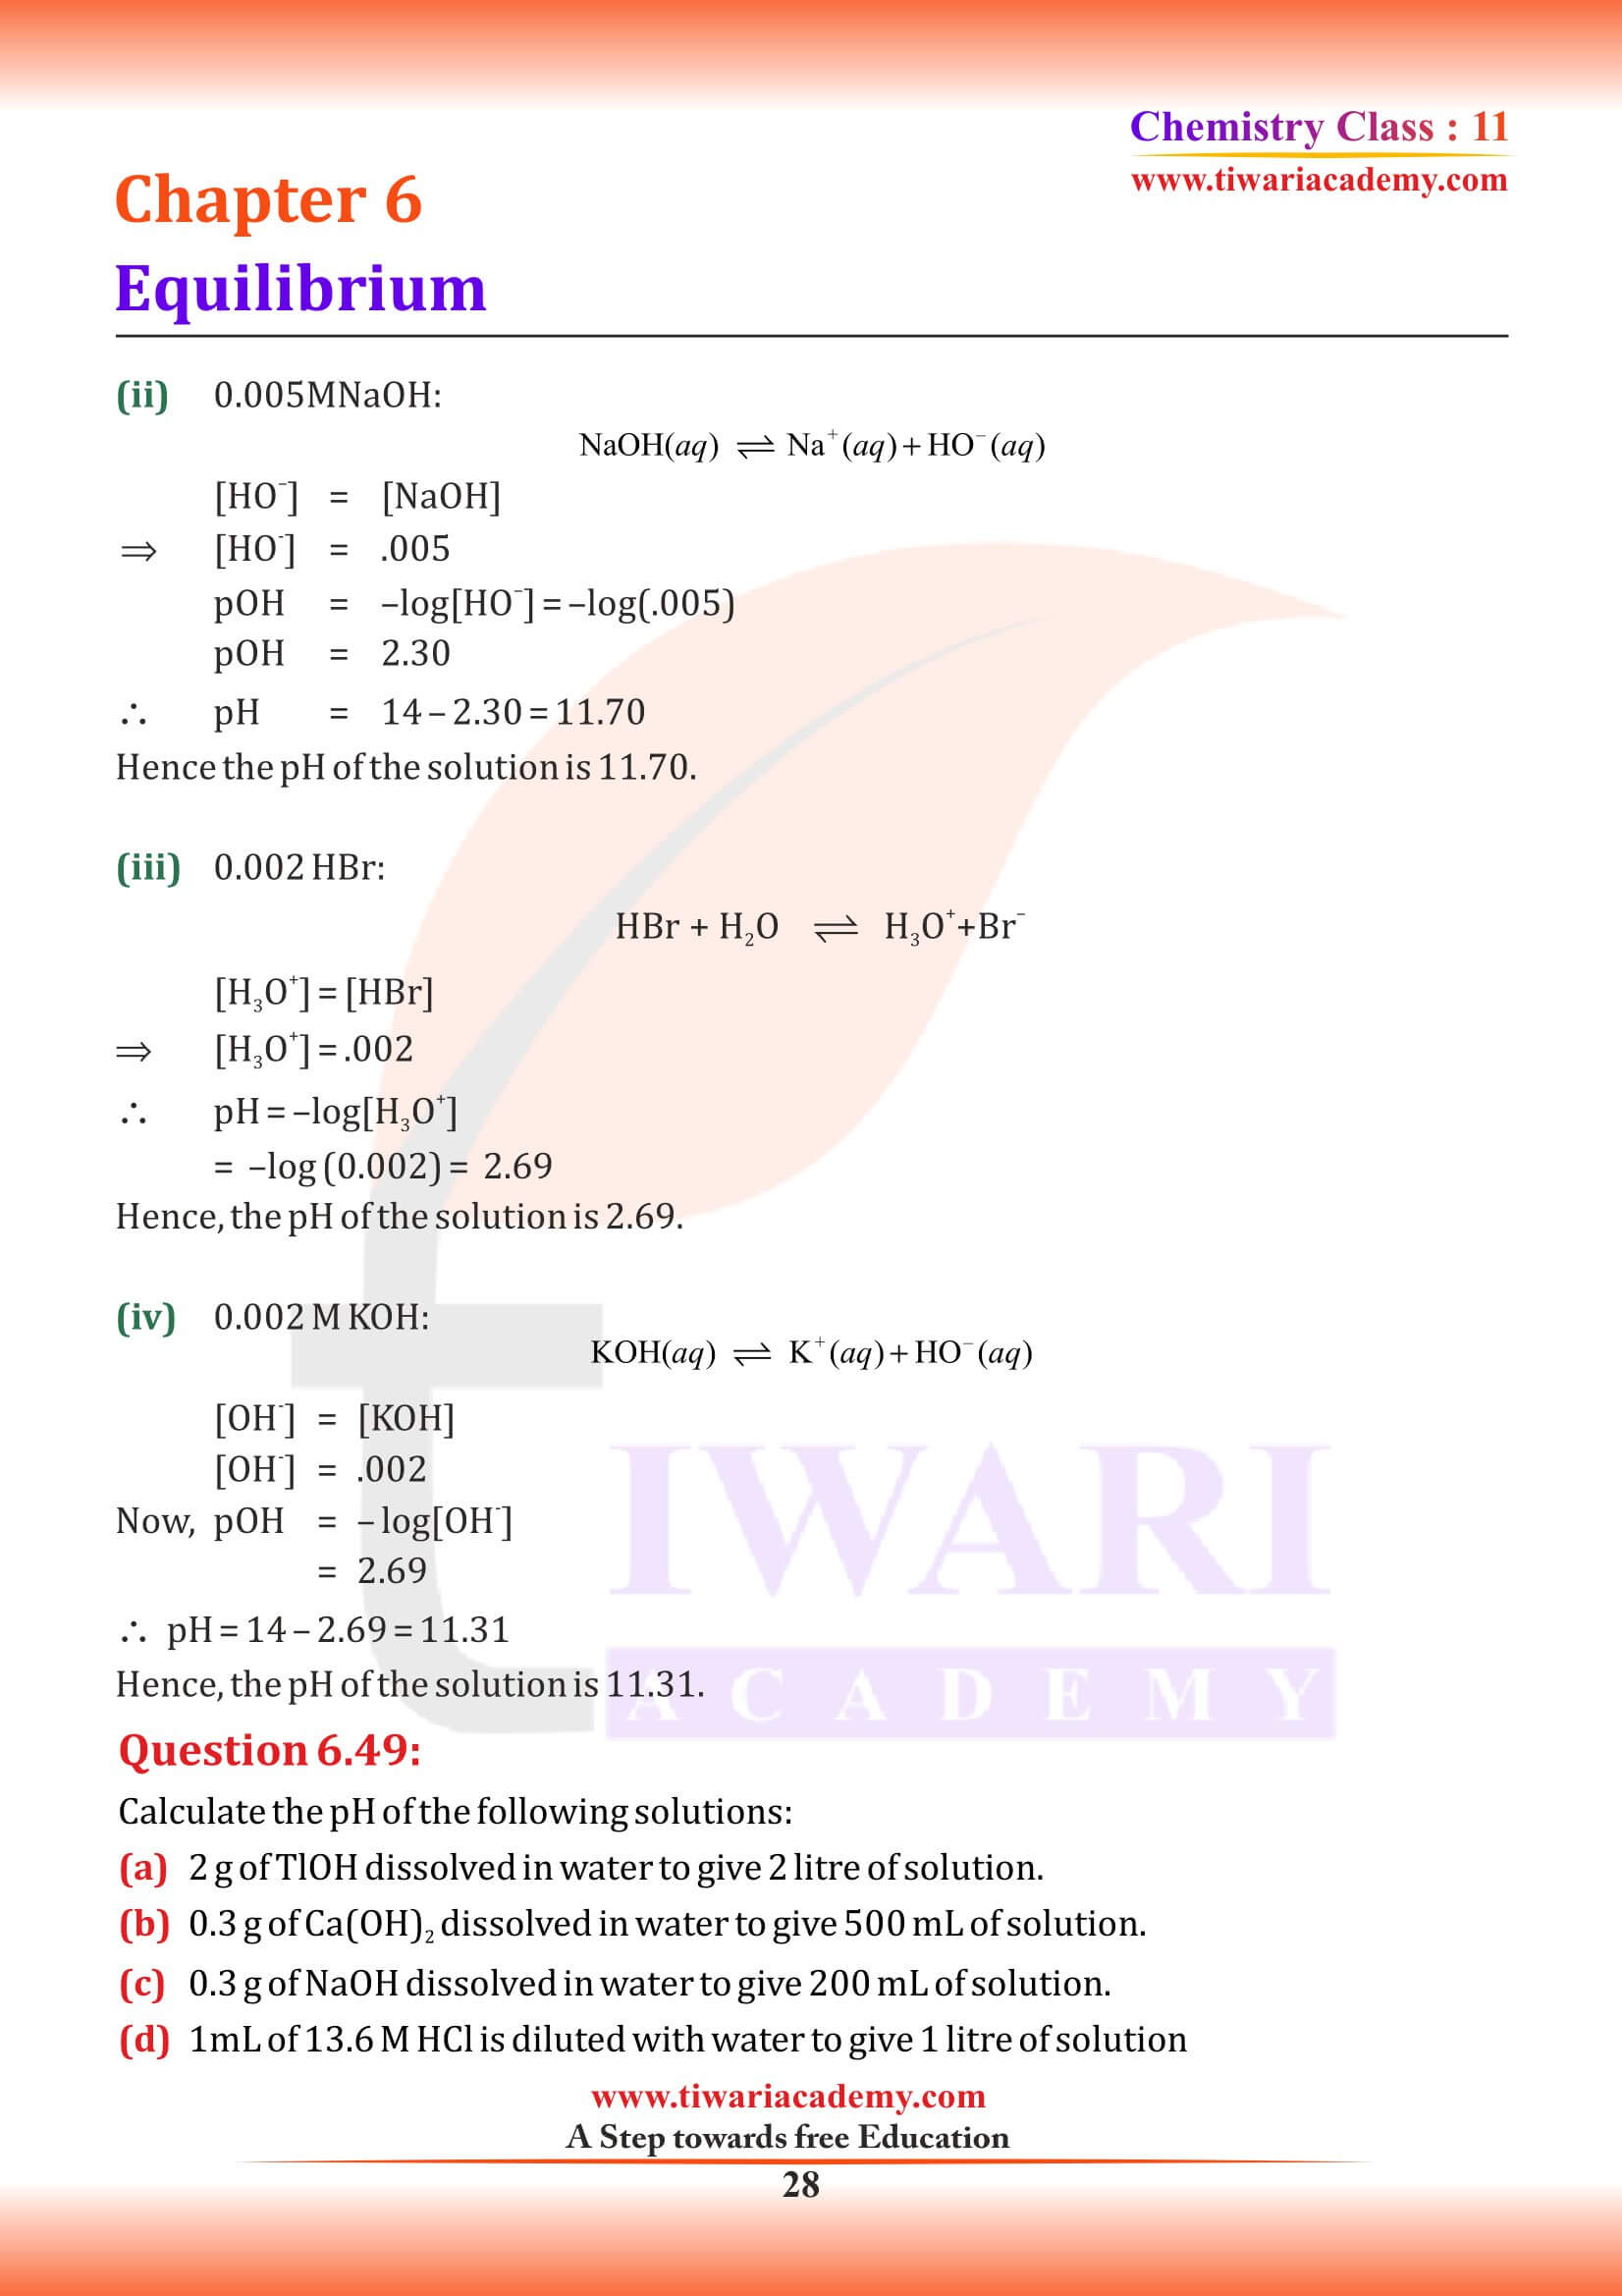 NCERT Class 11 Chemistry Chapter 6 Question Answers